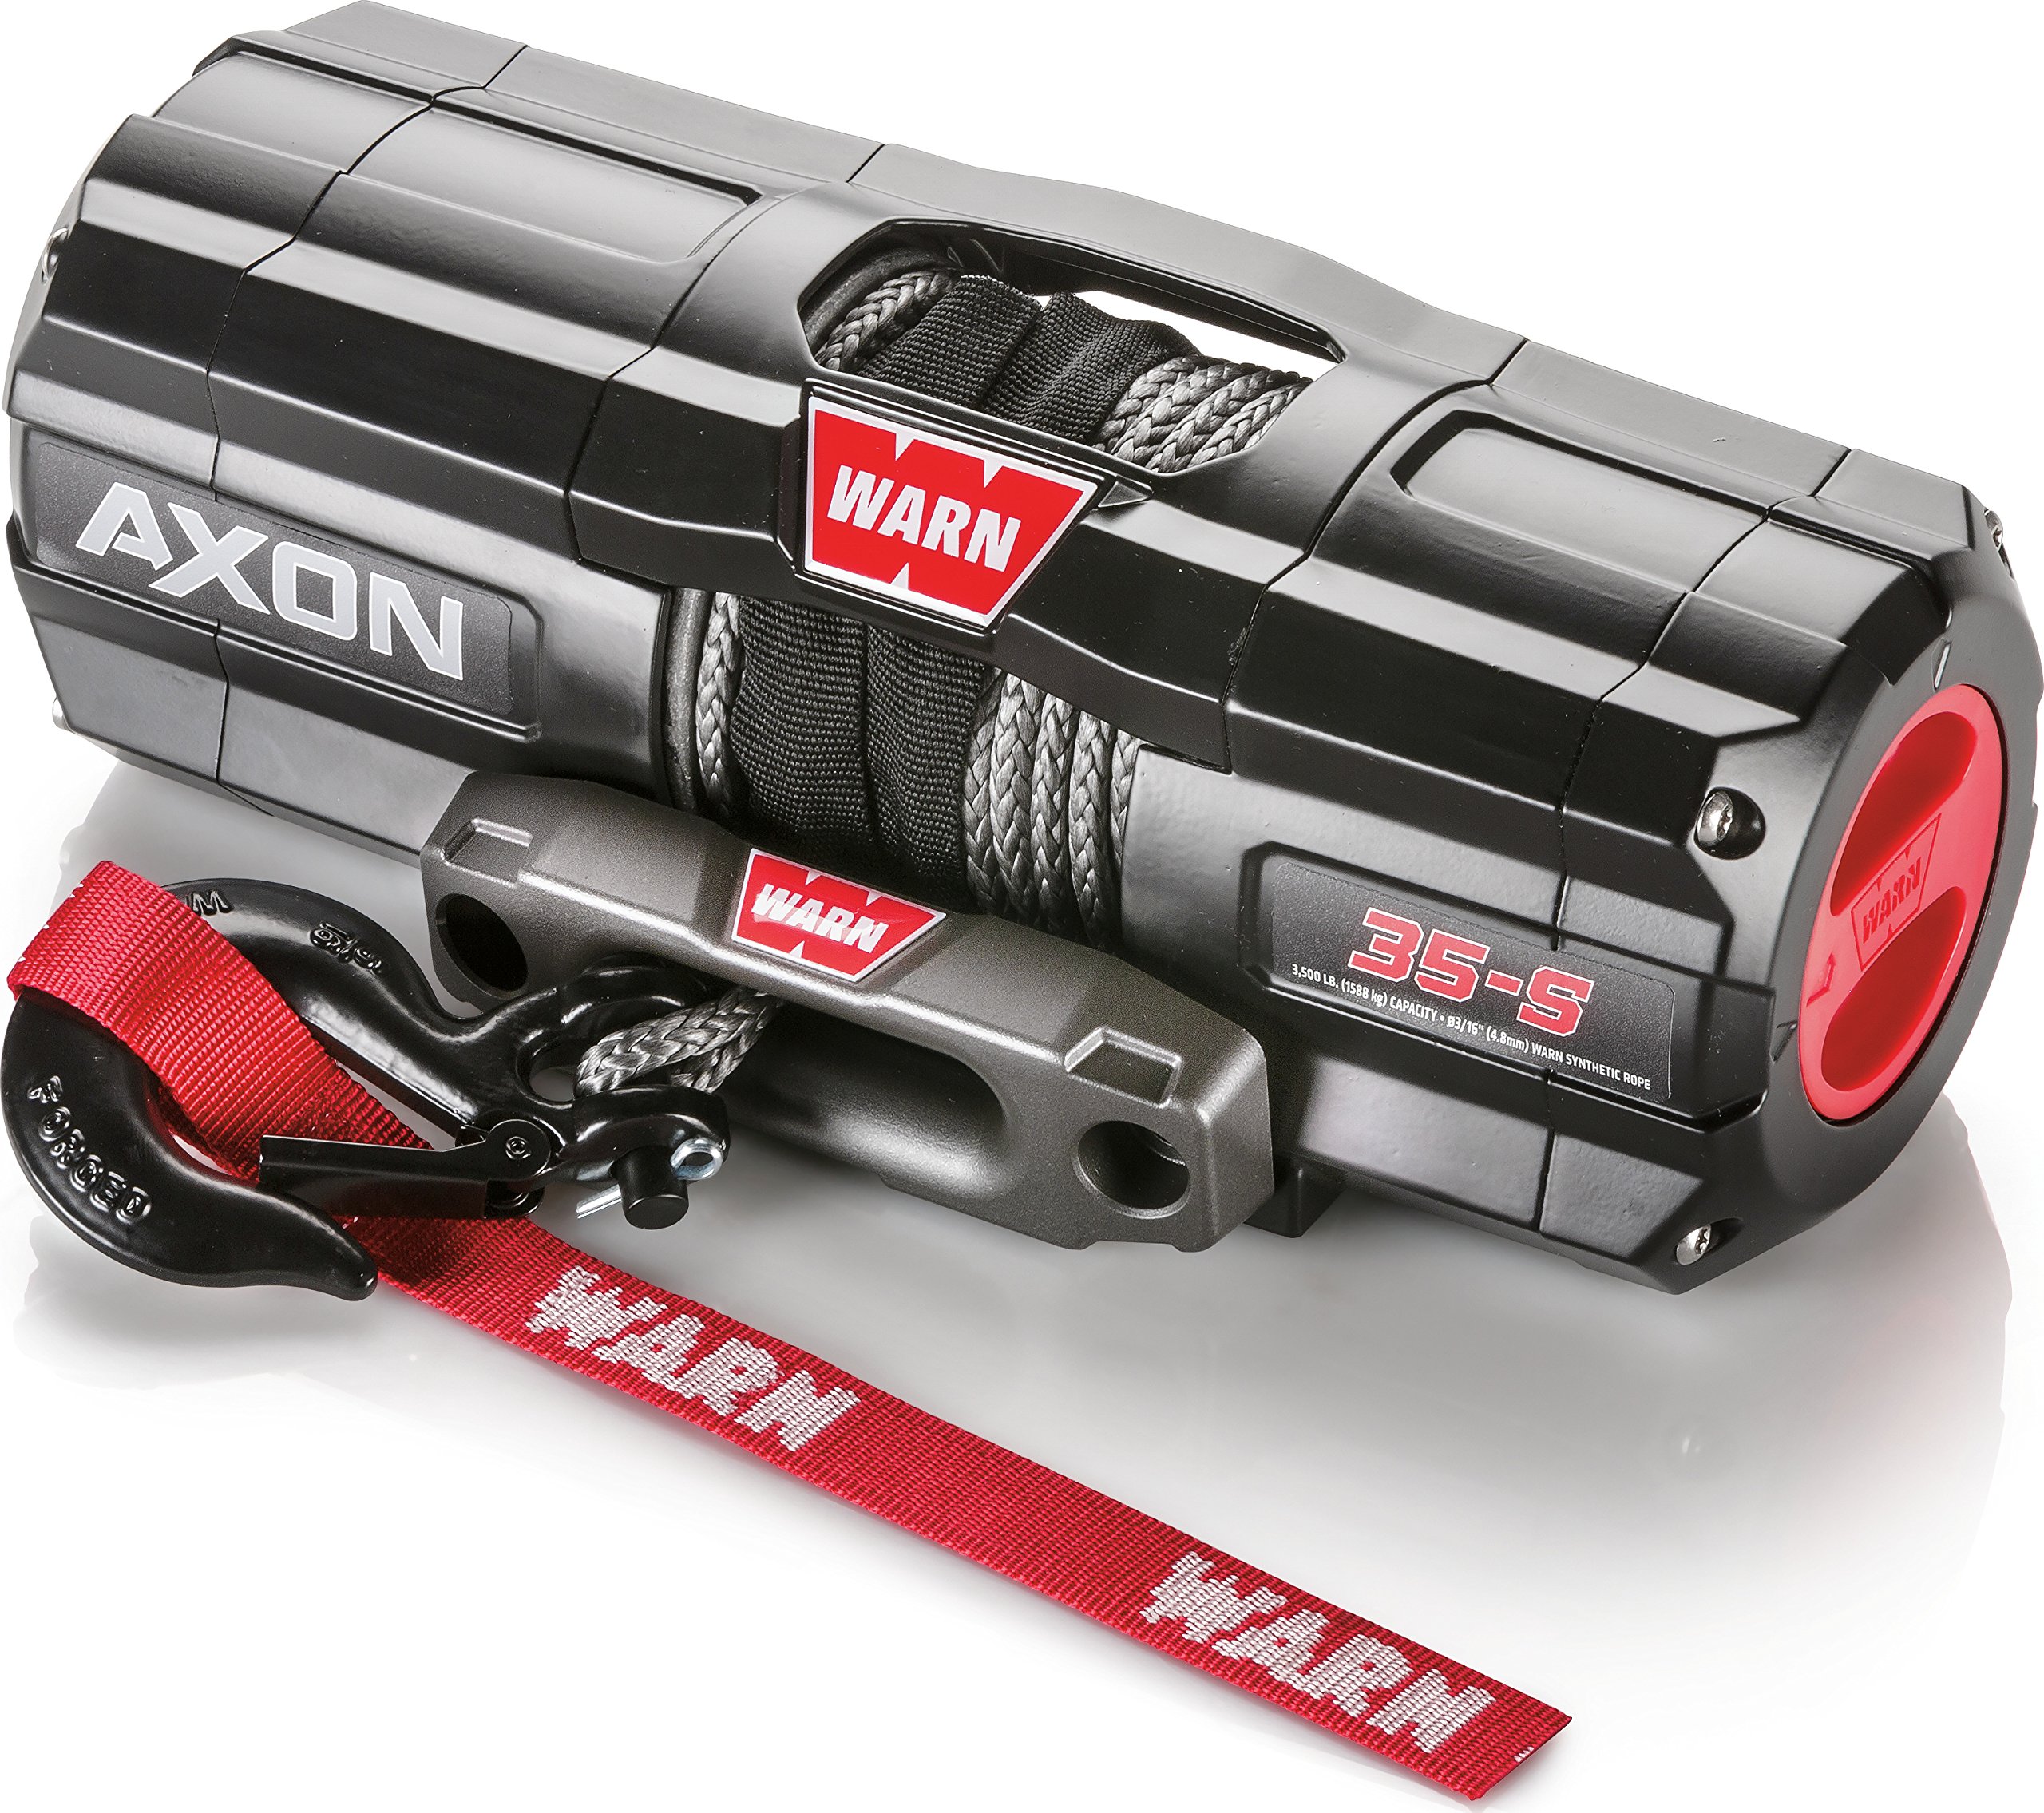 WARN 101130 AXON 35-S Powersports Winch with Spydura Synthetic Cable Rope: 3/16